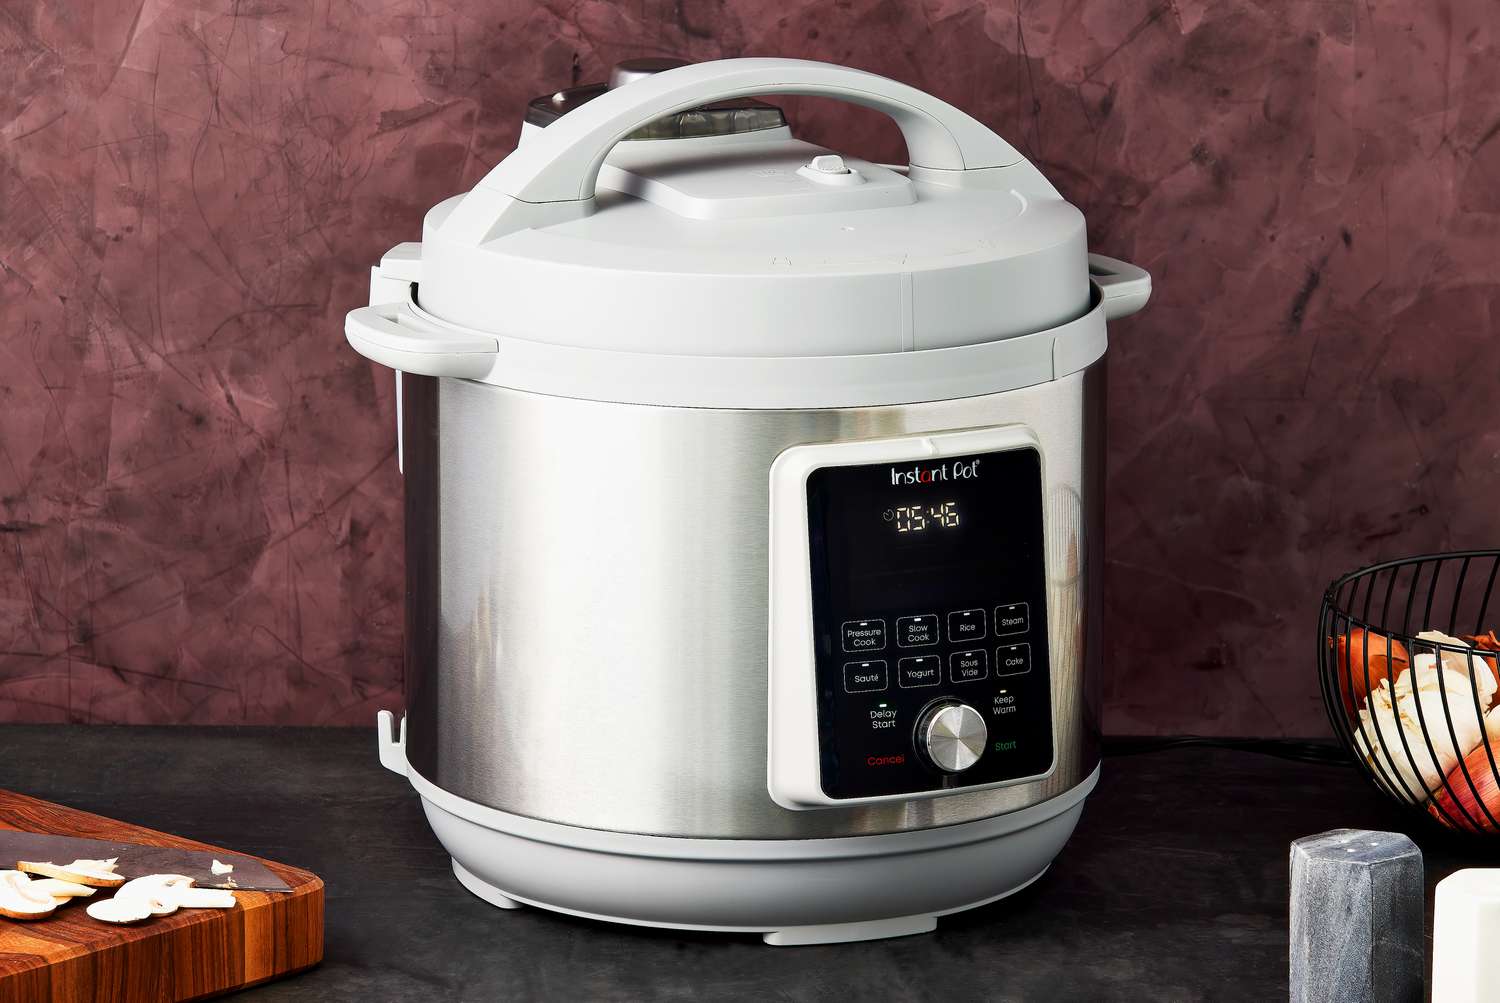 COMFEE' 16 in 1 Electric Pressure Cooker 8QT Rice Slow Cooker Olla